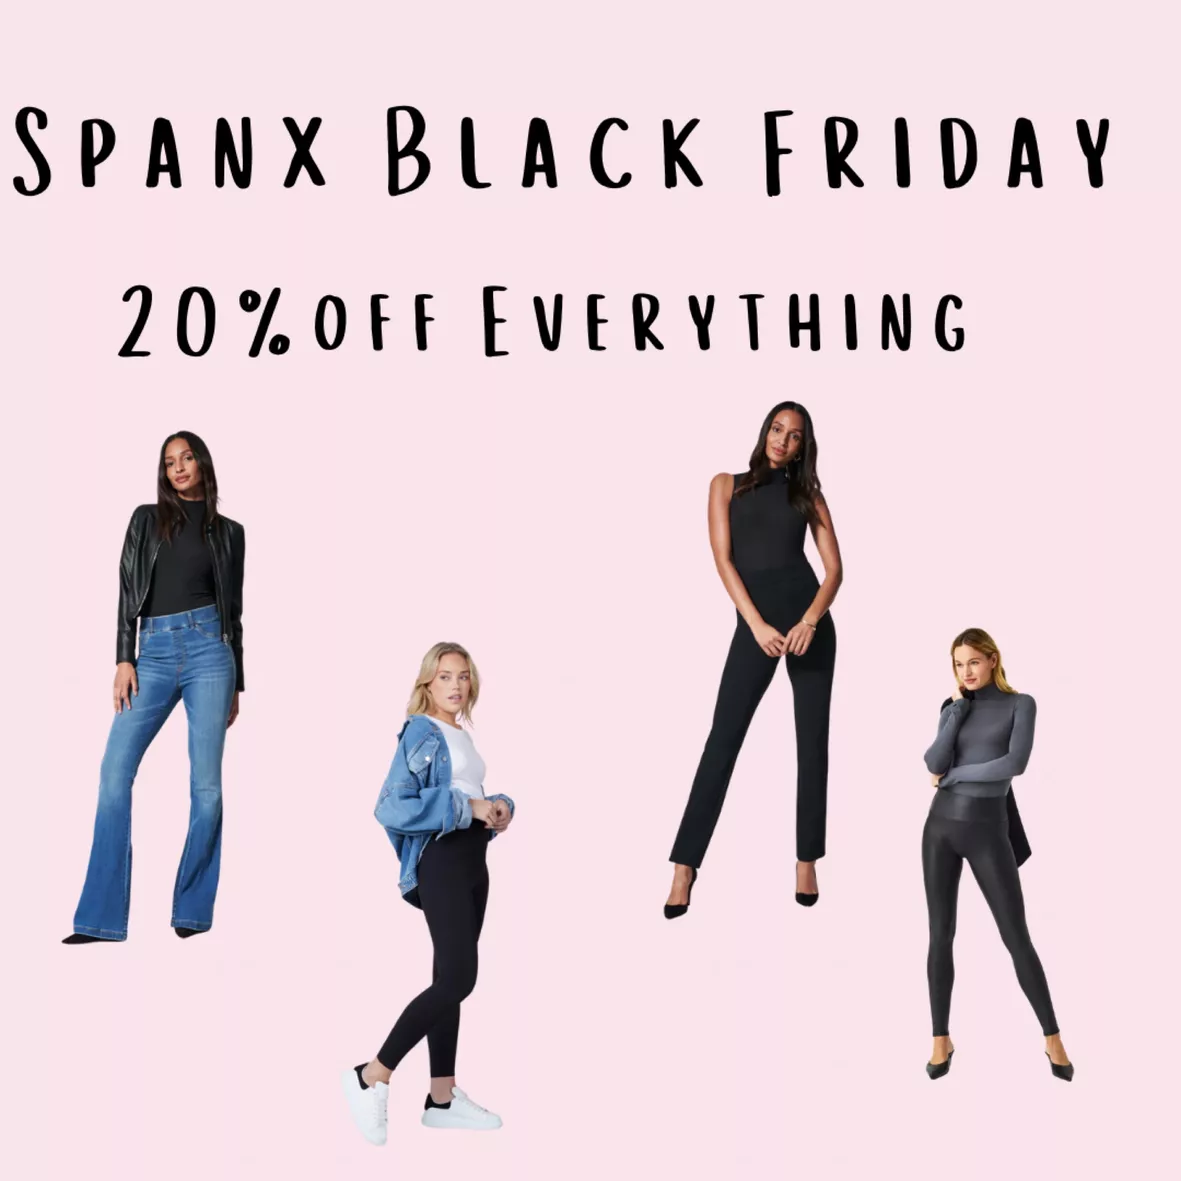 These Comfy Spanx Leggings Are 20% Off for Black Friday